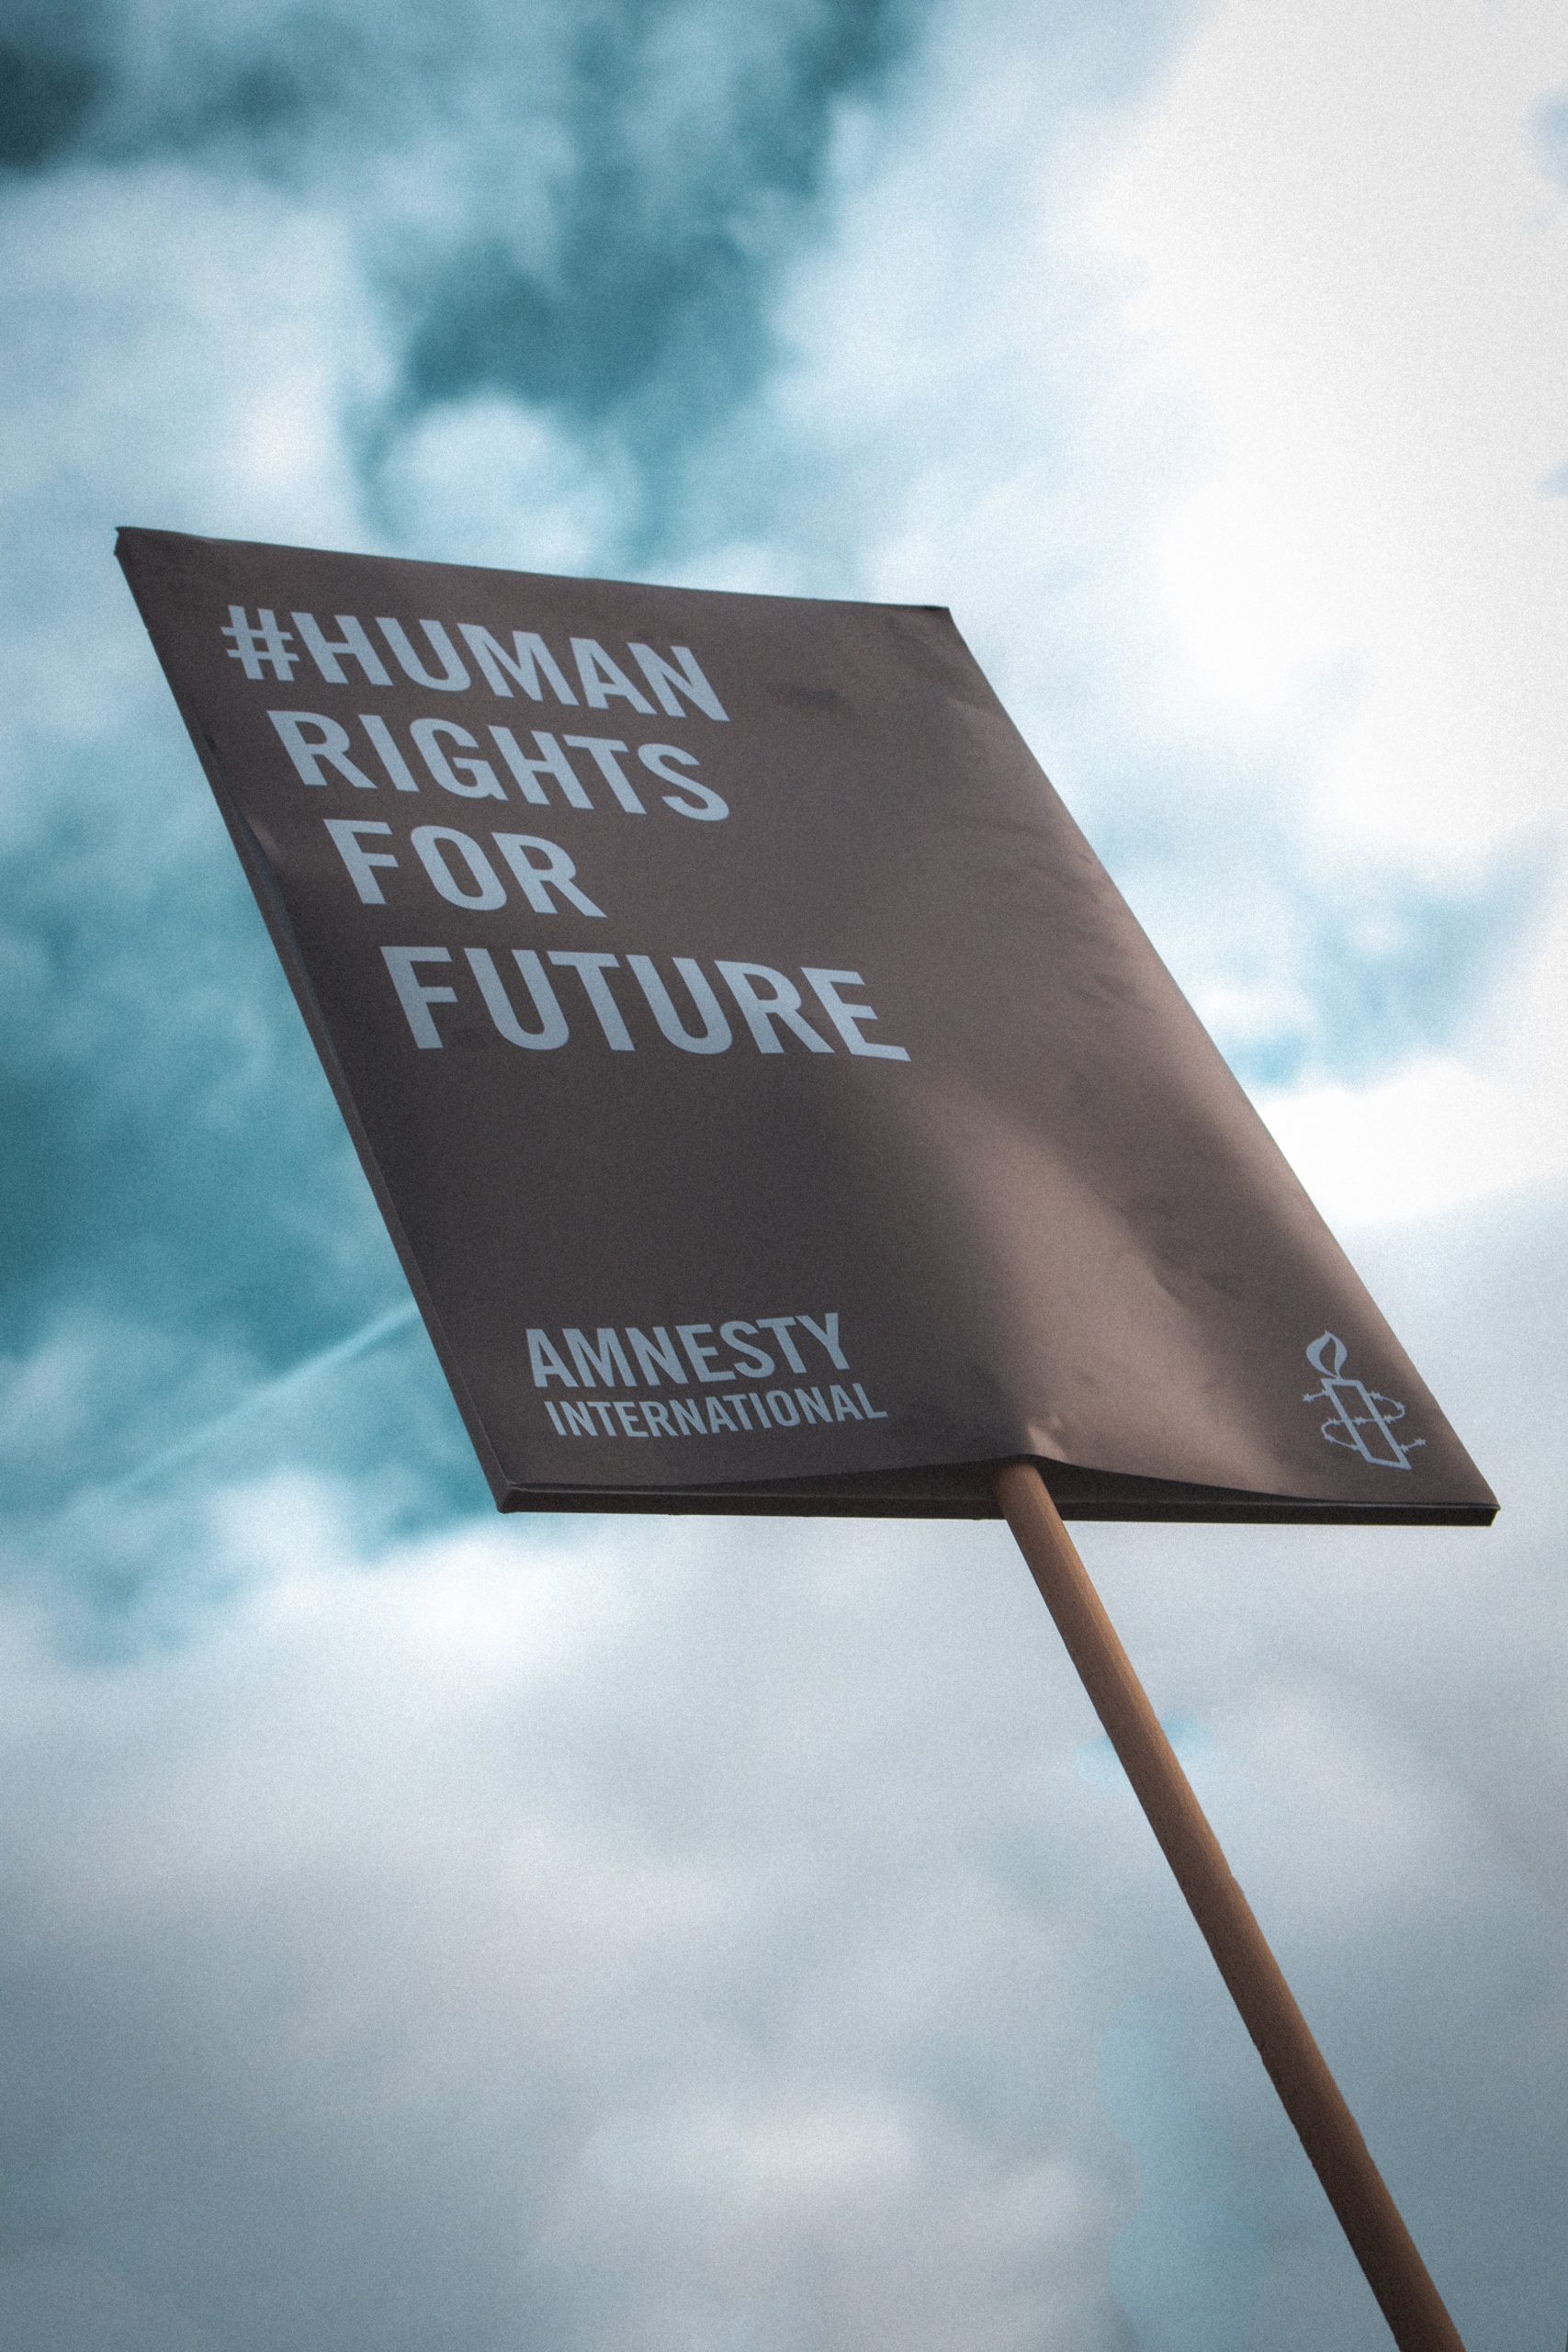 A protest signs reads "human rights for future" on black card